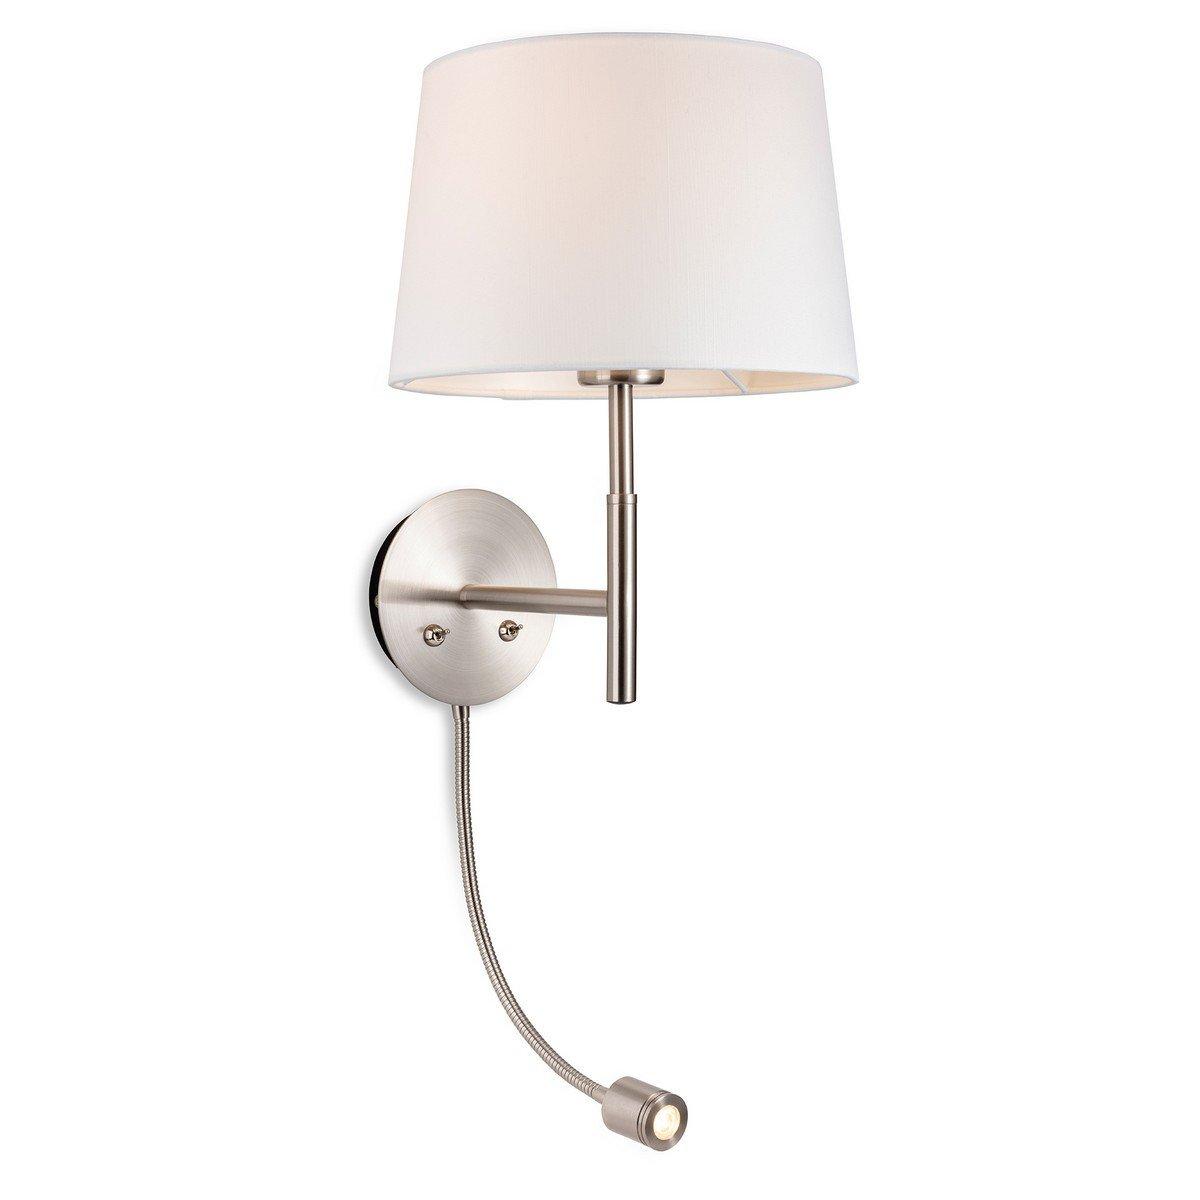 Seymour Classic Switched Wall Lamp with Adjustable Reading Light Brushed Steel with Cream Shade